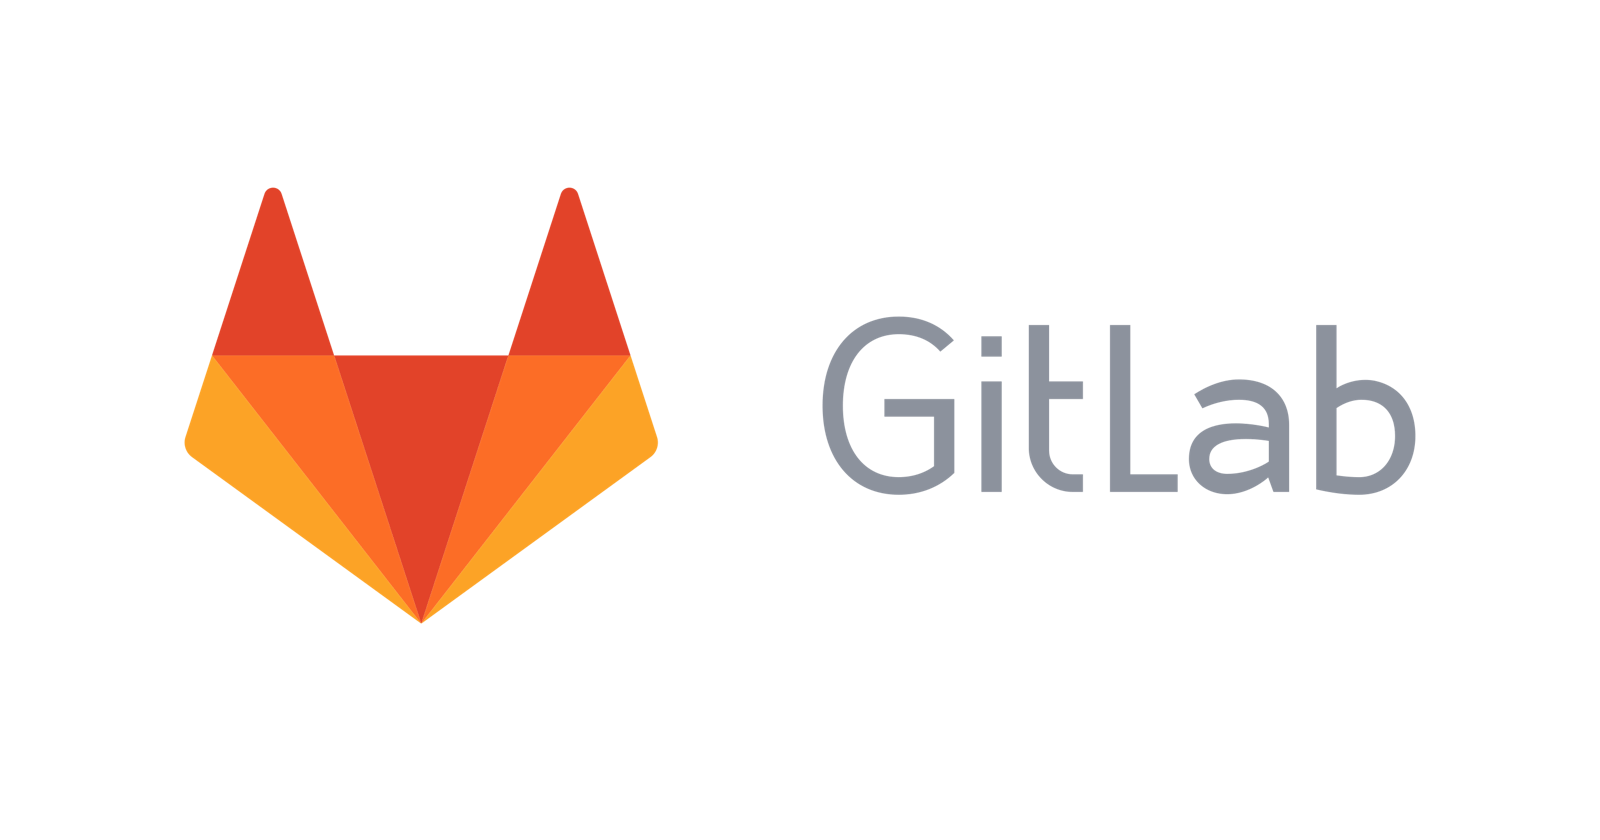 Refined Gitlab as a productivity boost.